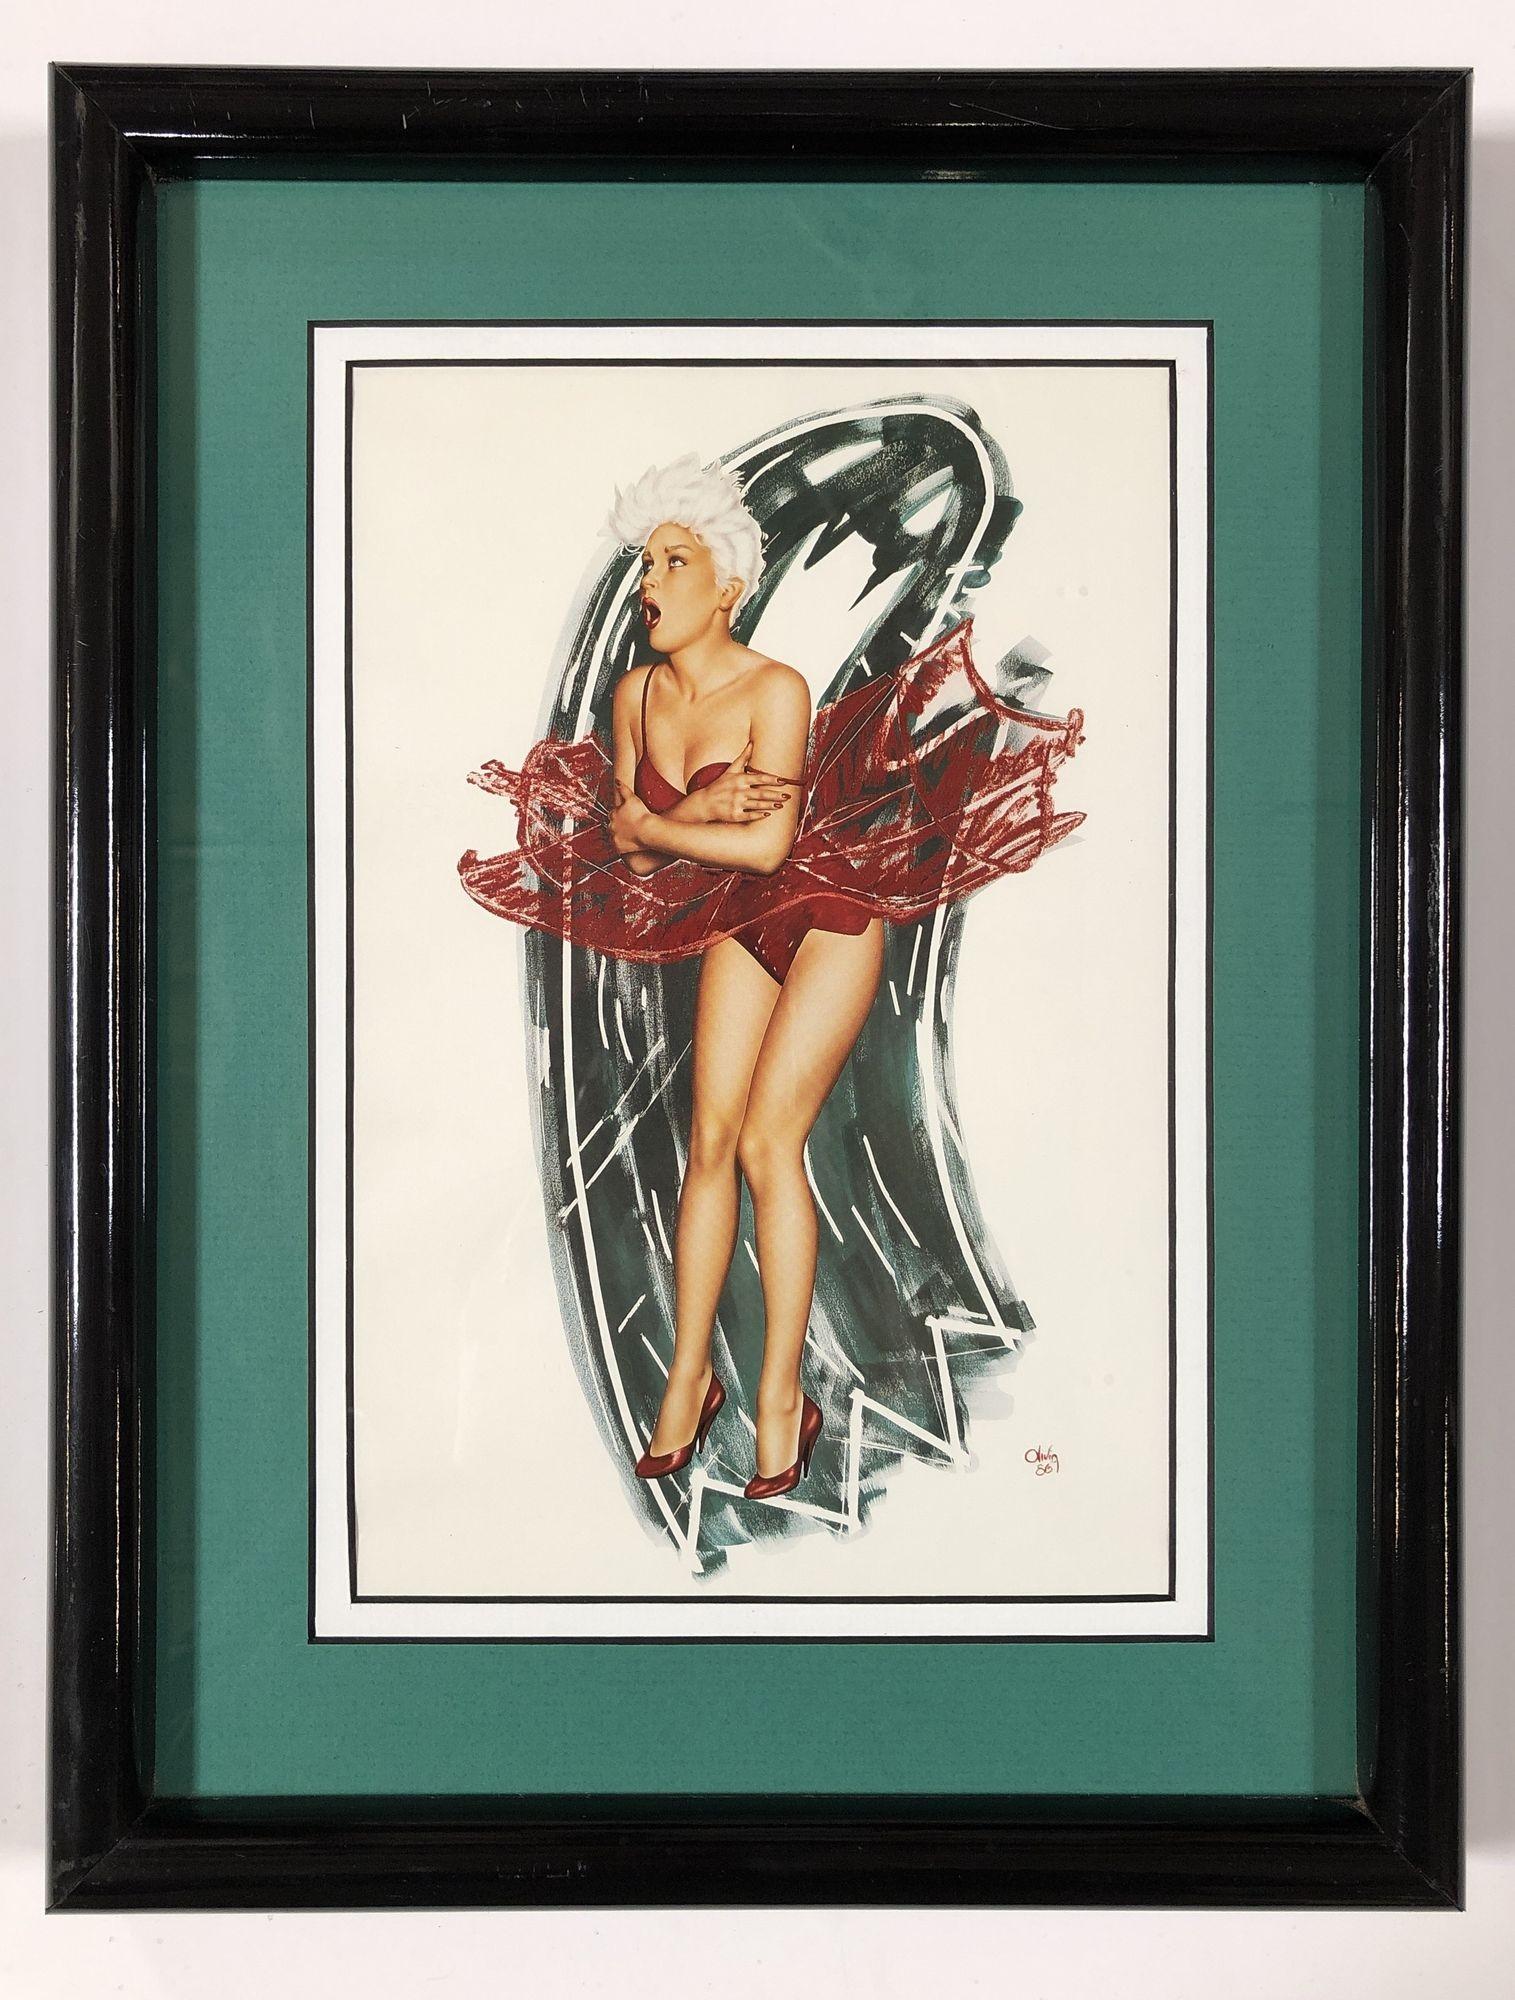 Original 1986 Pin-up artwork featuring silver hair woman in a red dress signed 